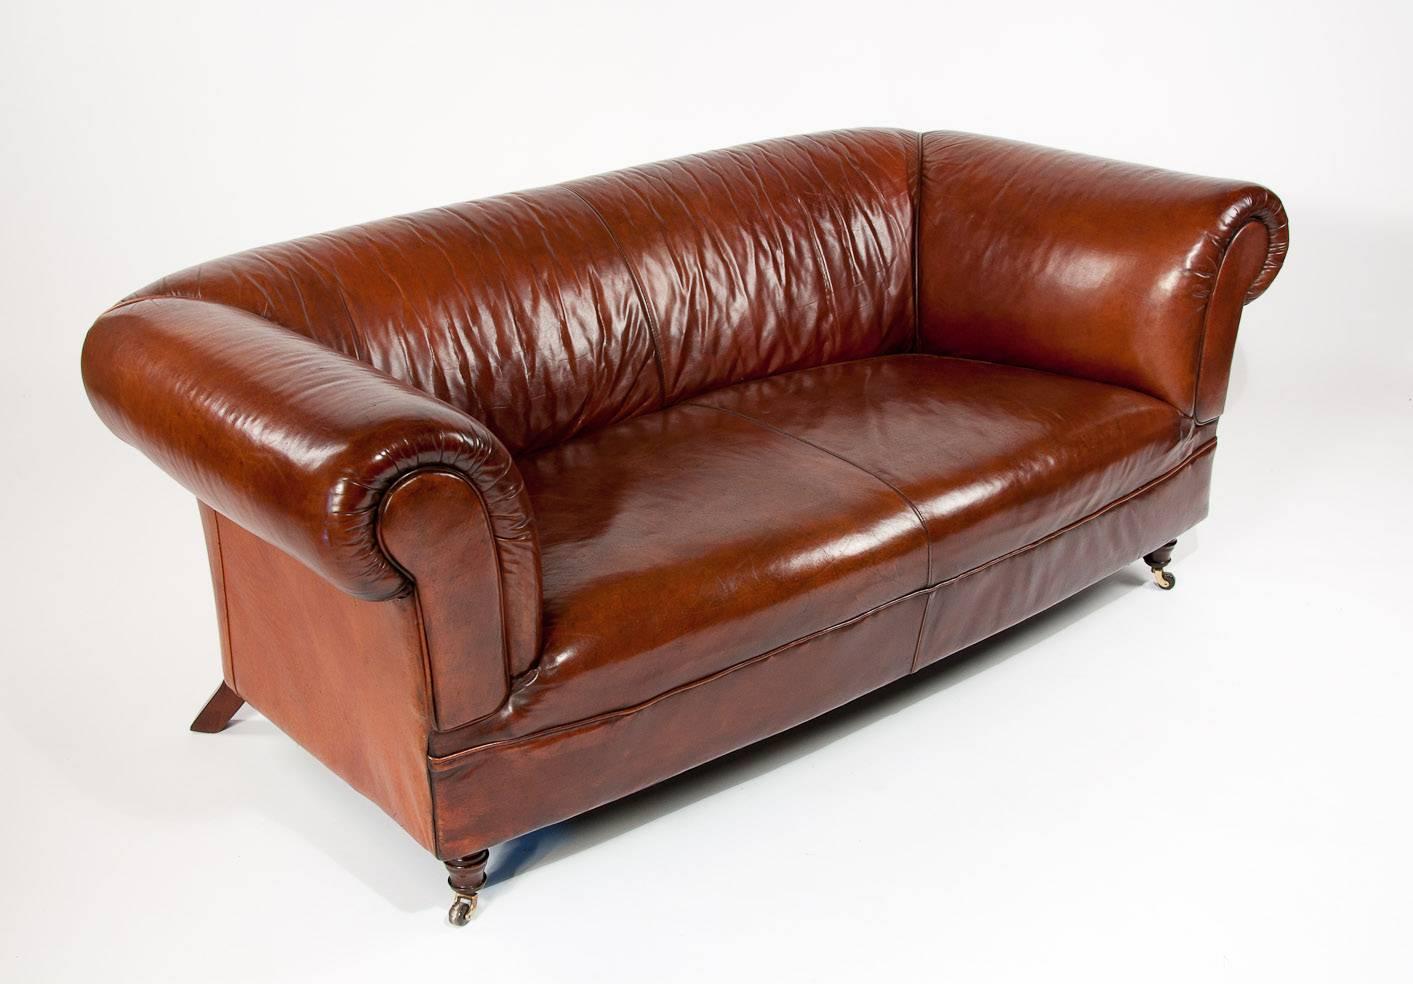 Victorian Leather Upholstered Chesterfield Mid-20th Century